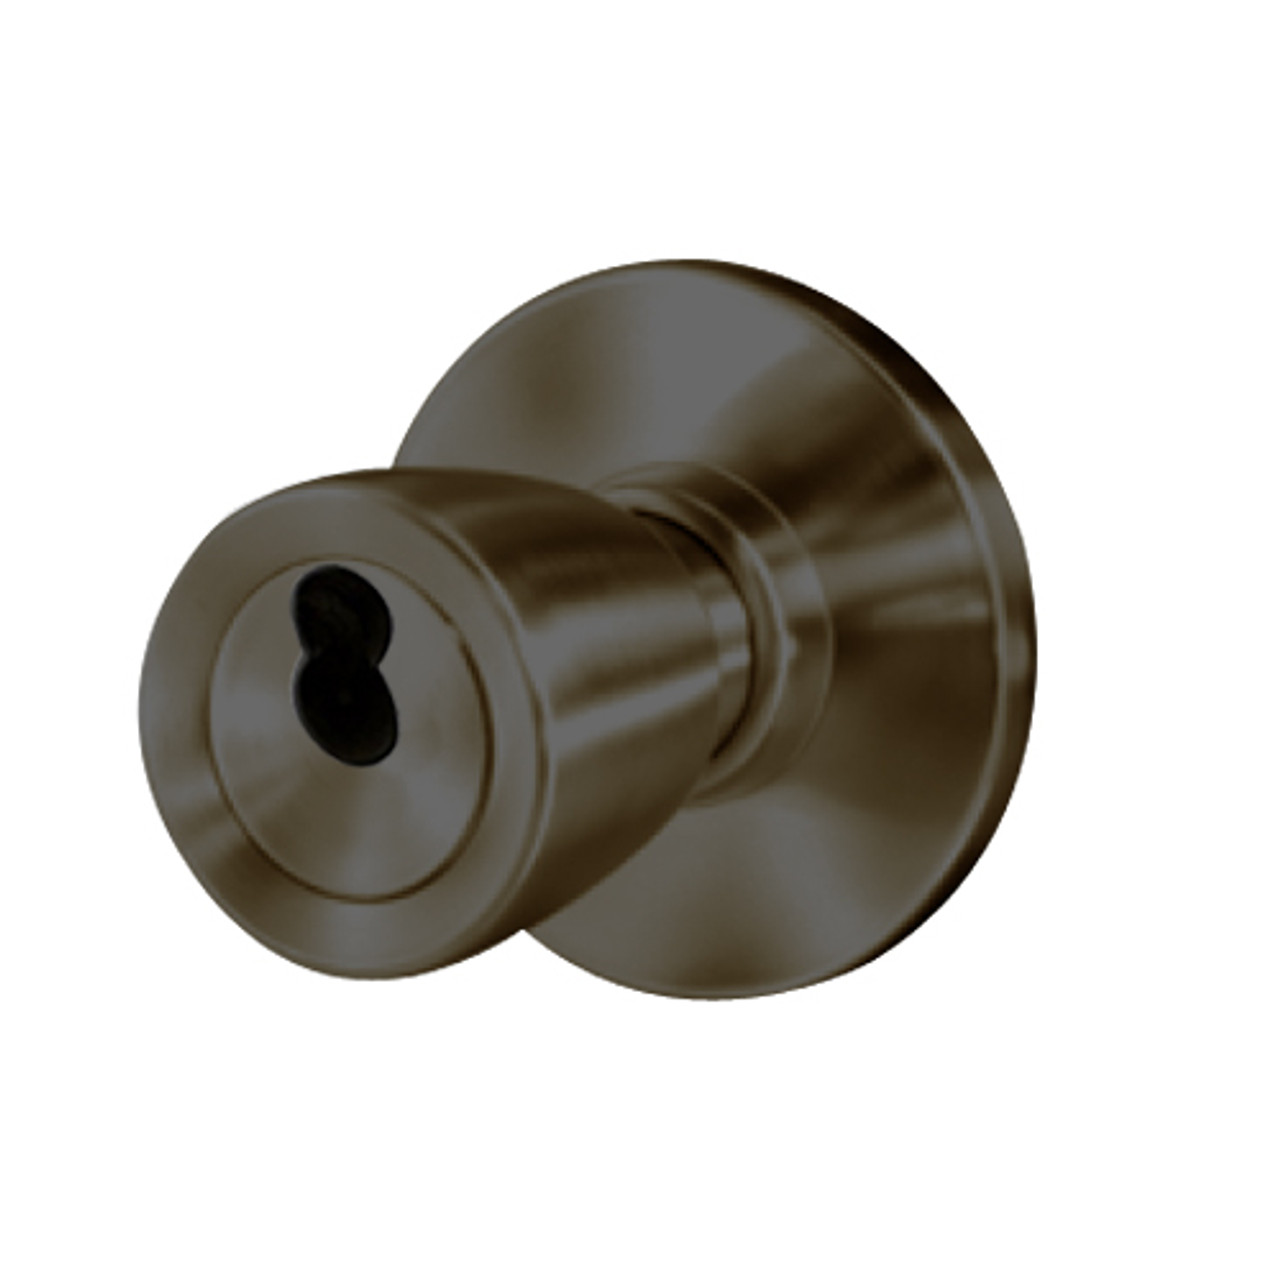 8K47YD6AS3613 Best 8K Series Exit Heavy Duty Cylindrical Knob Locks with Tulip Style in Oil Rubbed Bronze